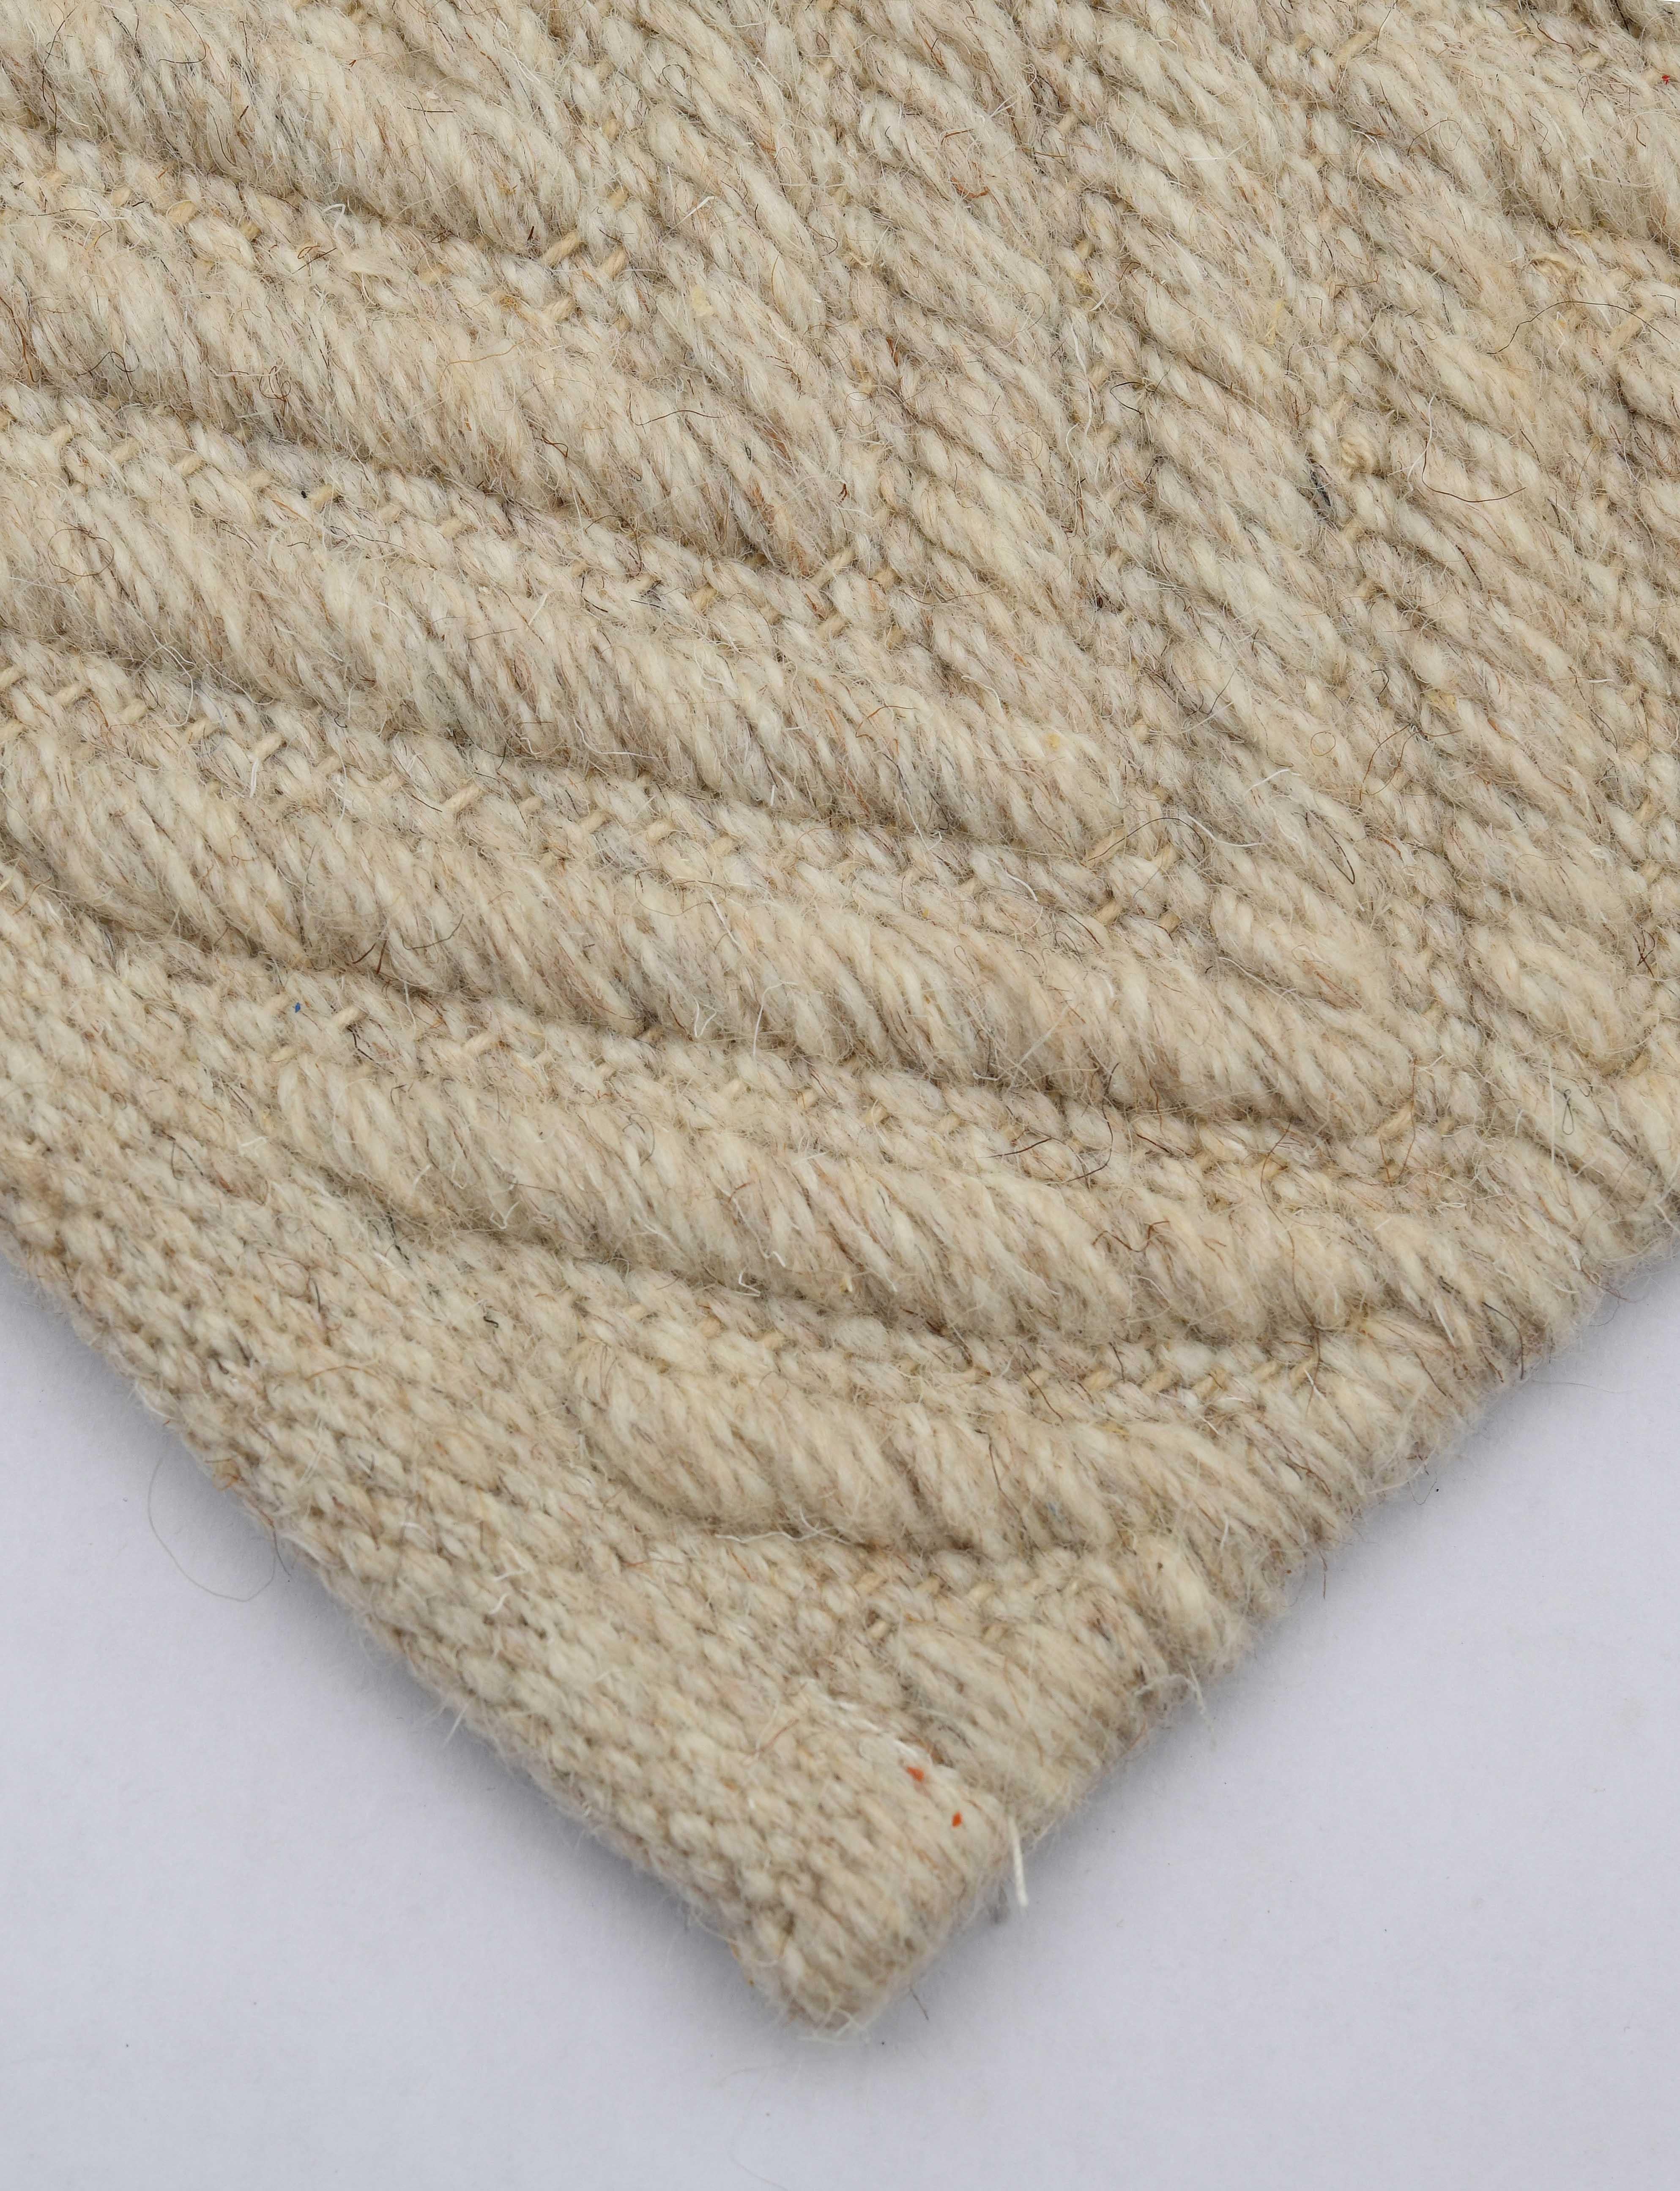 Indian Lanx, Beige, Handwoven Face 60% Undyed NZ Wool, 40% Undyed MED Wool, 6' x 9' For Sale